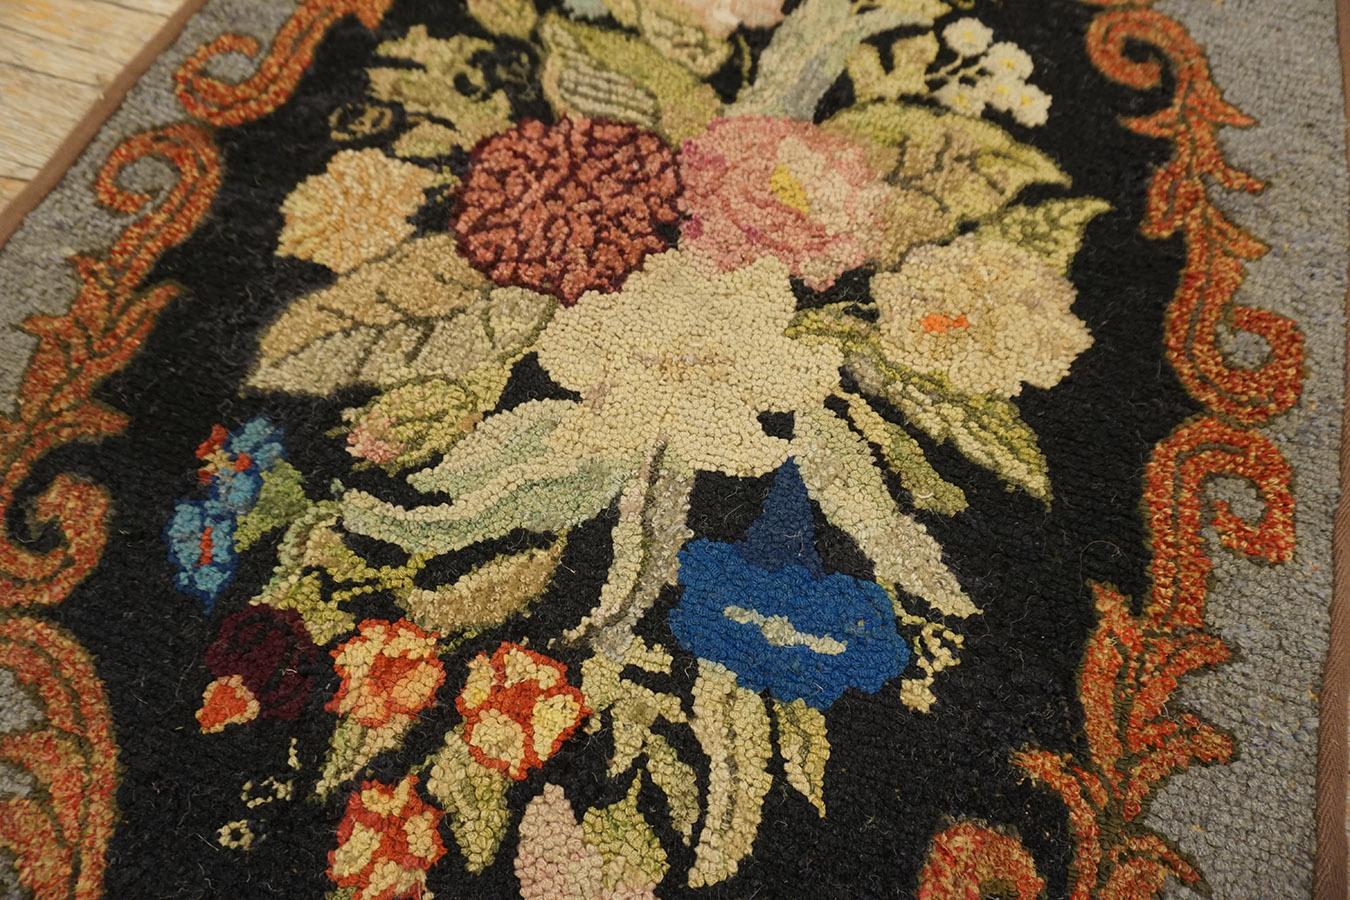 Early 20th Century American Hooked Rug ( 2' x 3' - 62 x 92 ) For Sale 2